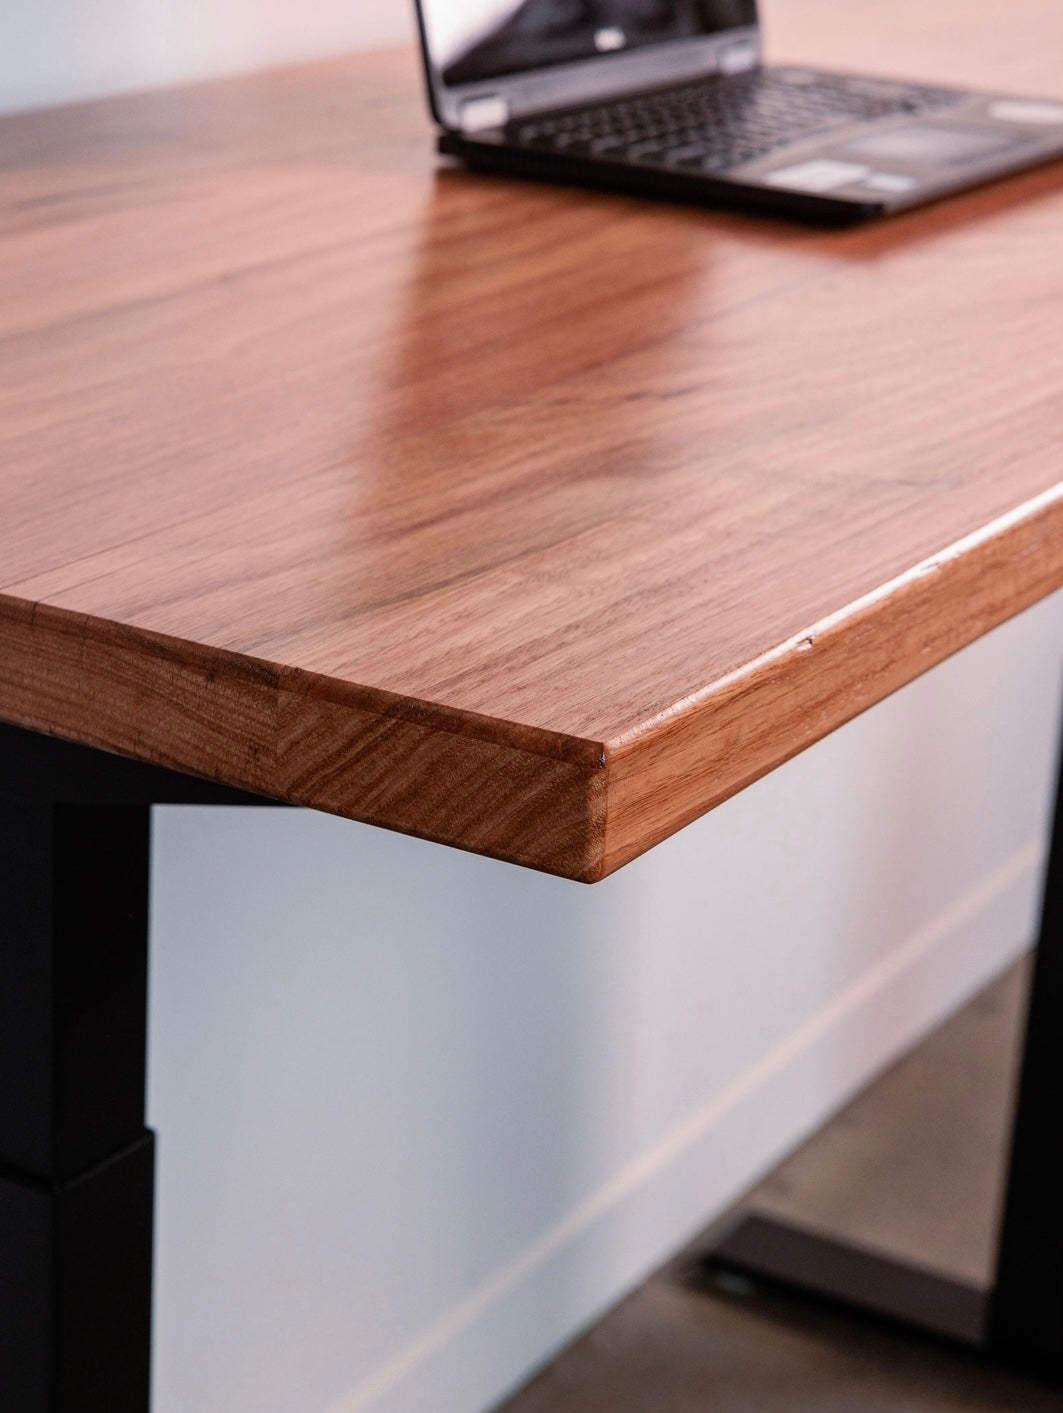 Upgrade Your Workspace with a Sit Stand Wooden Memory E-Desk